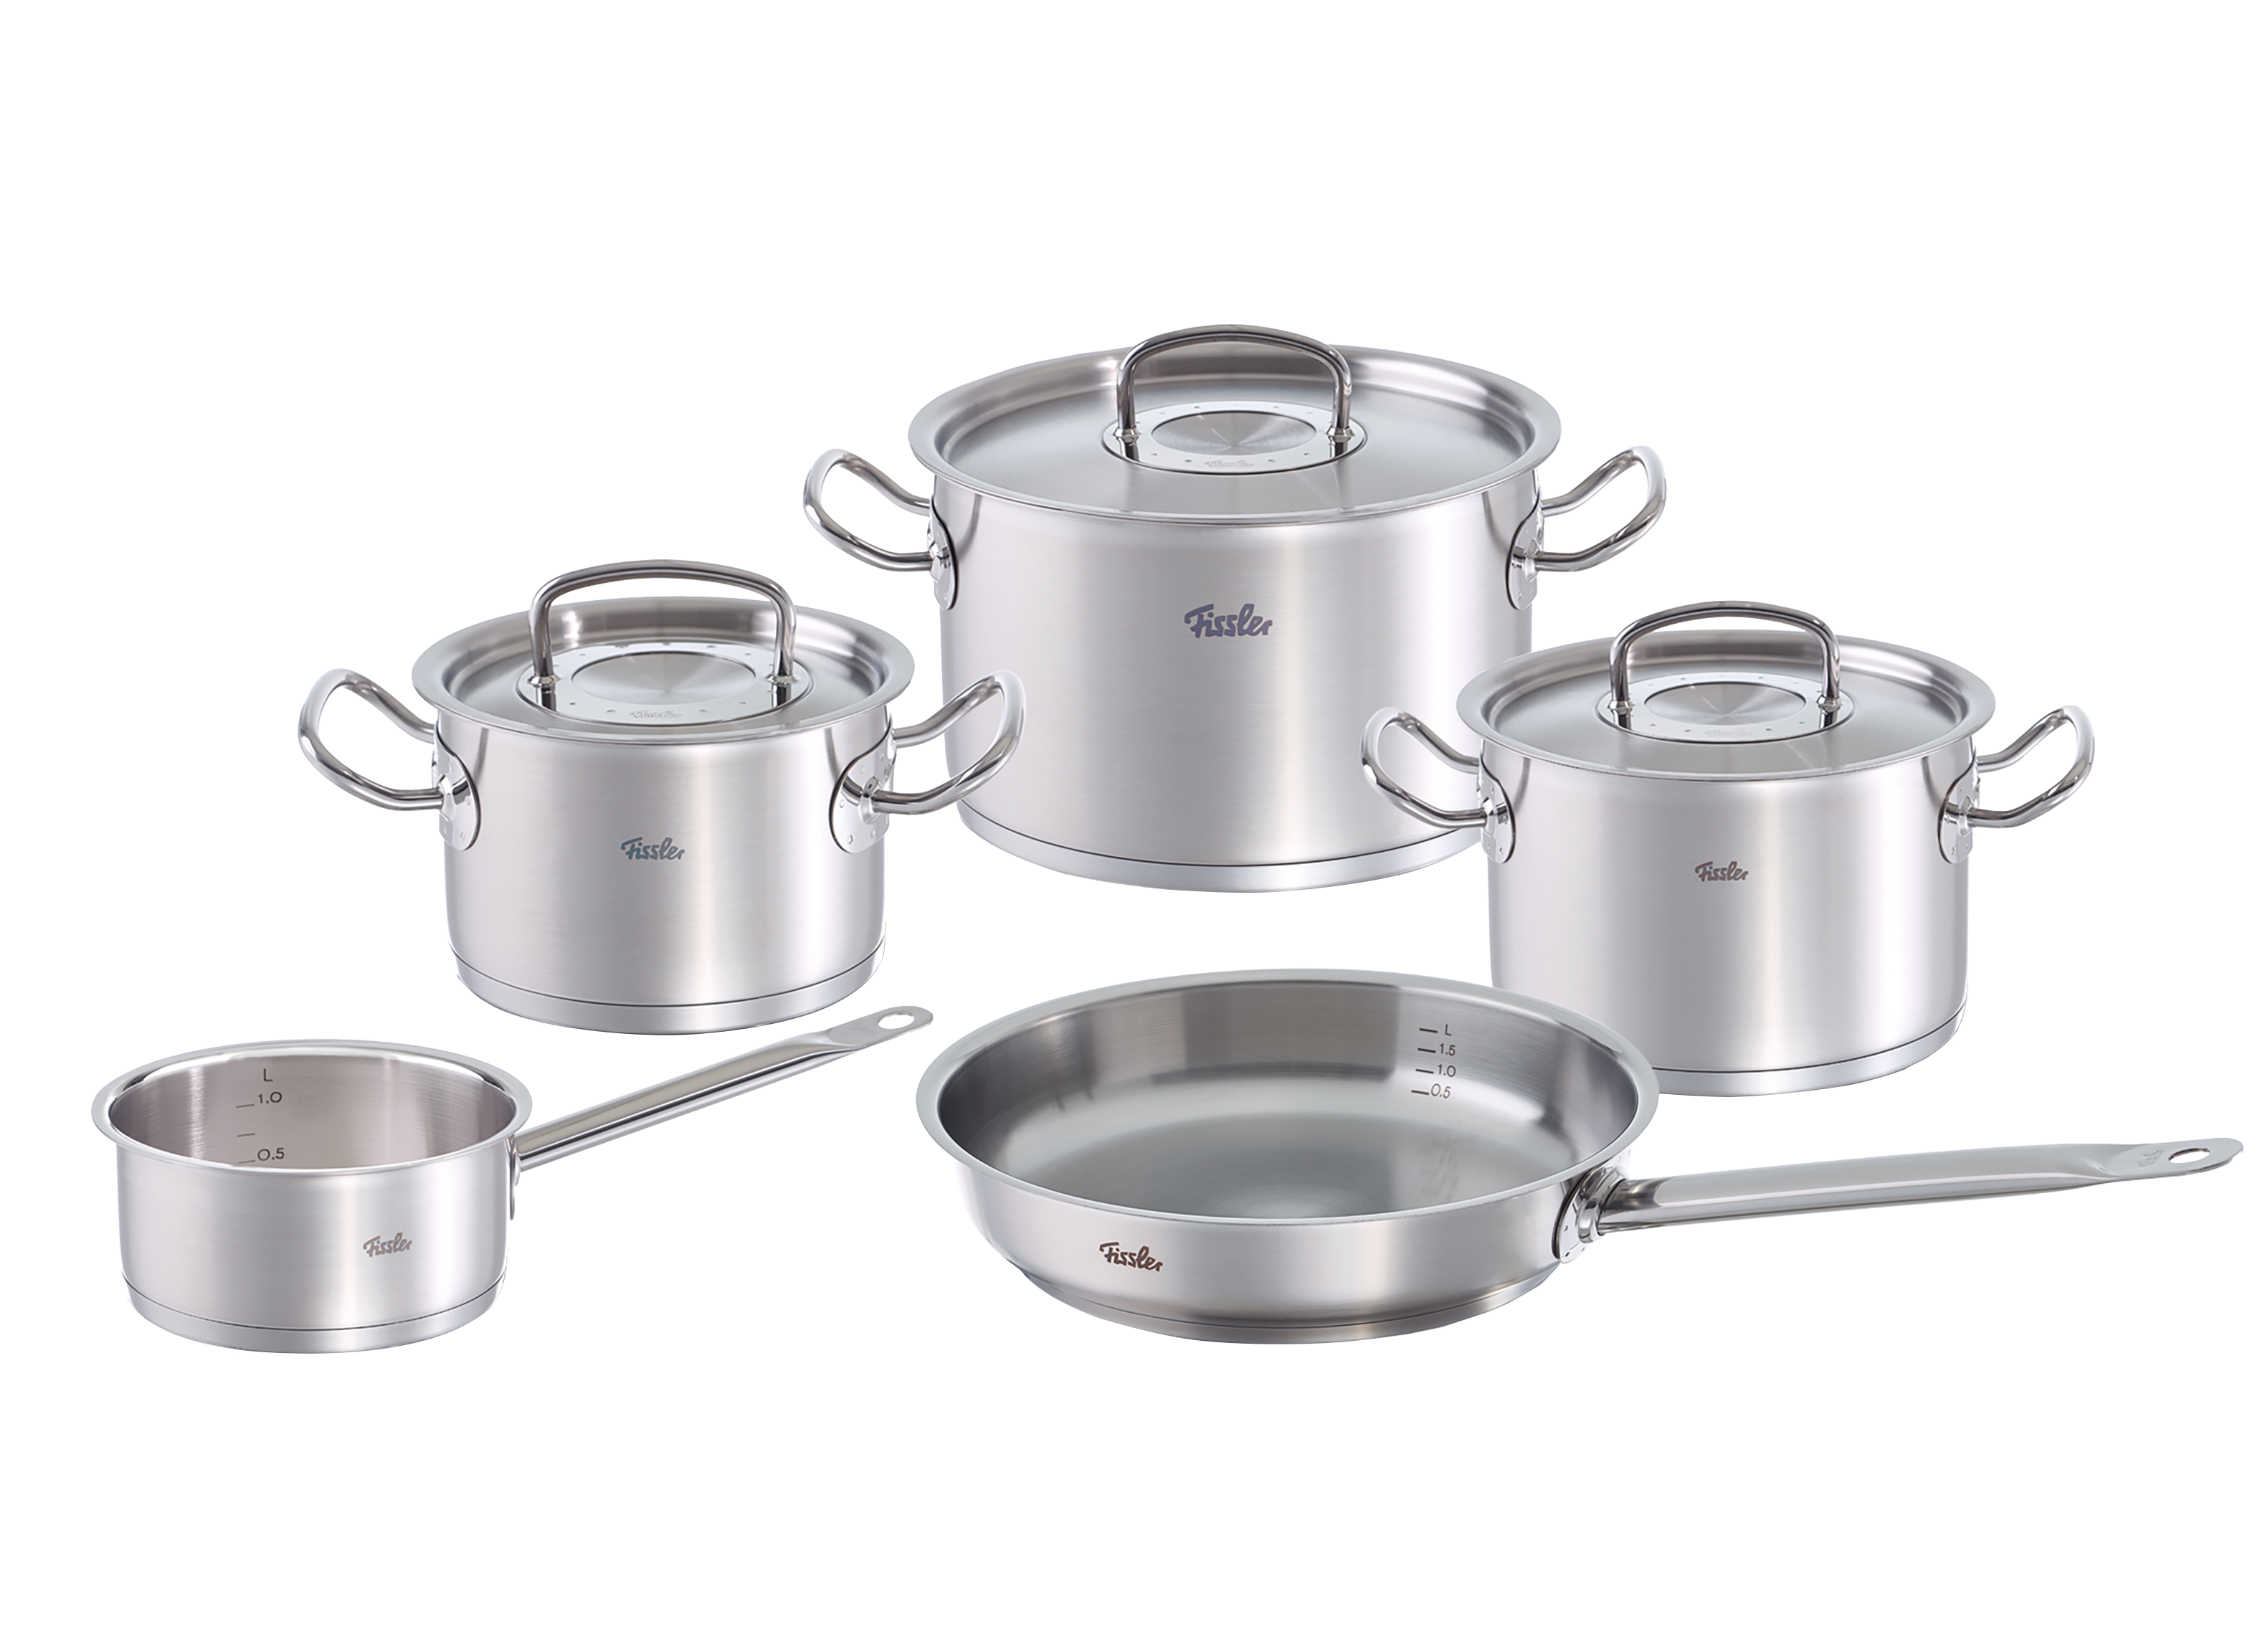 Consumer Original-Profi Fissler - Review Stainless Cookware Reports Collection Steel